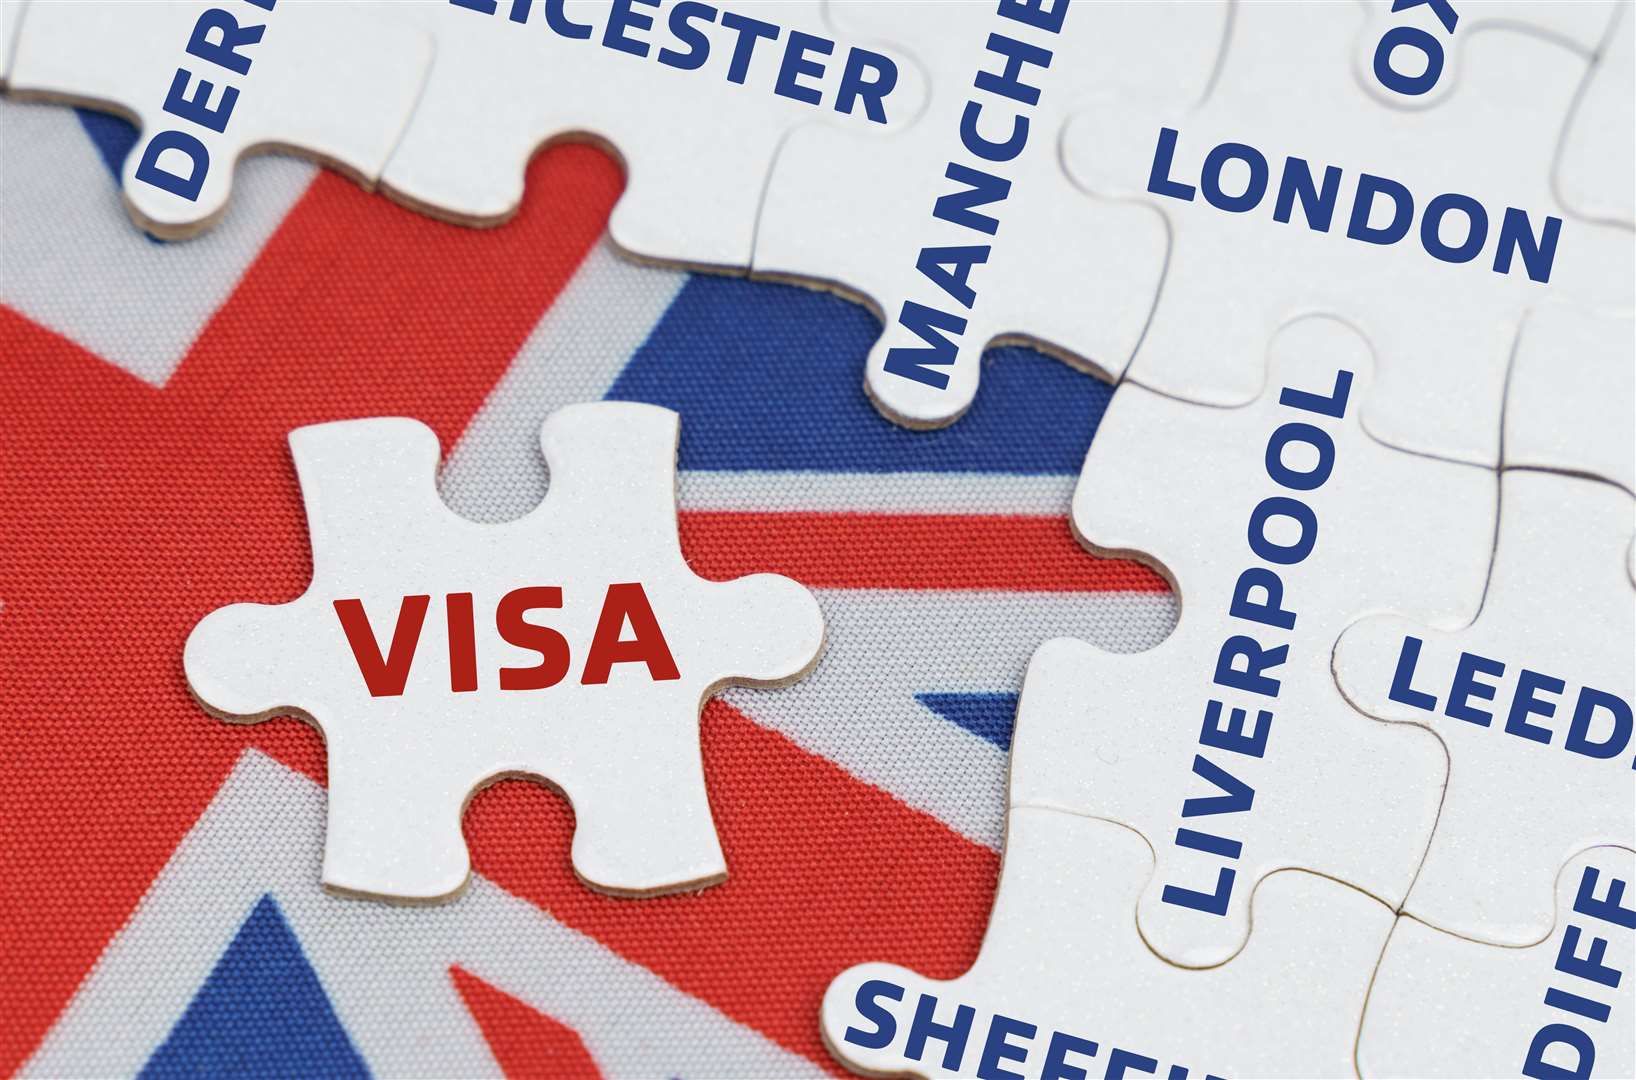 More students are arriving on visas and staying longer, the ONS said (Alamy/PA)